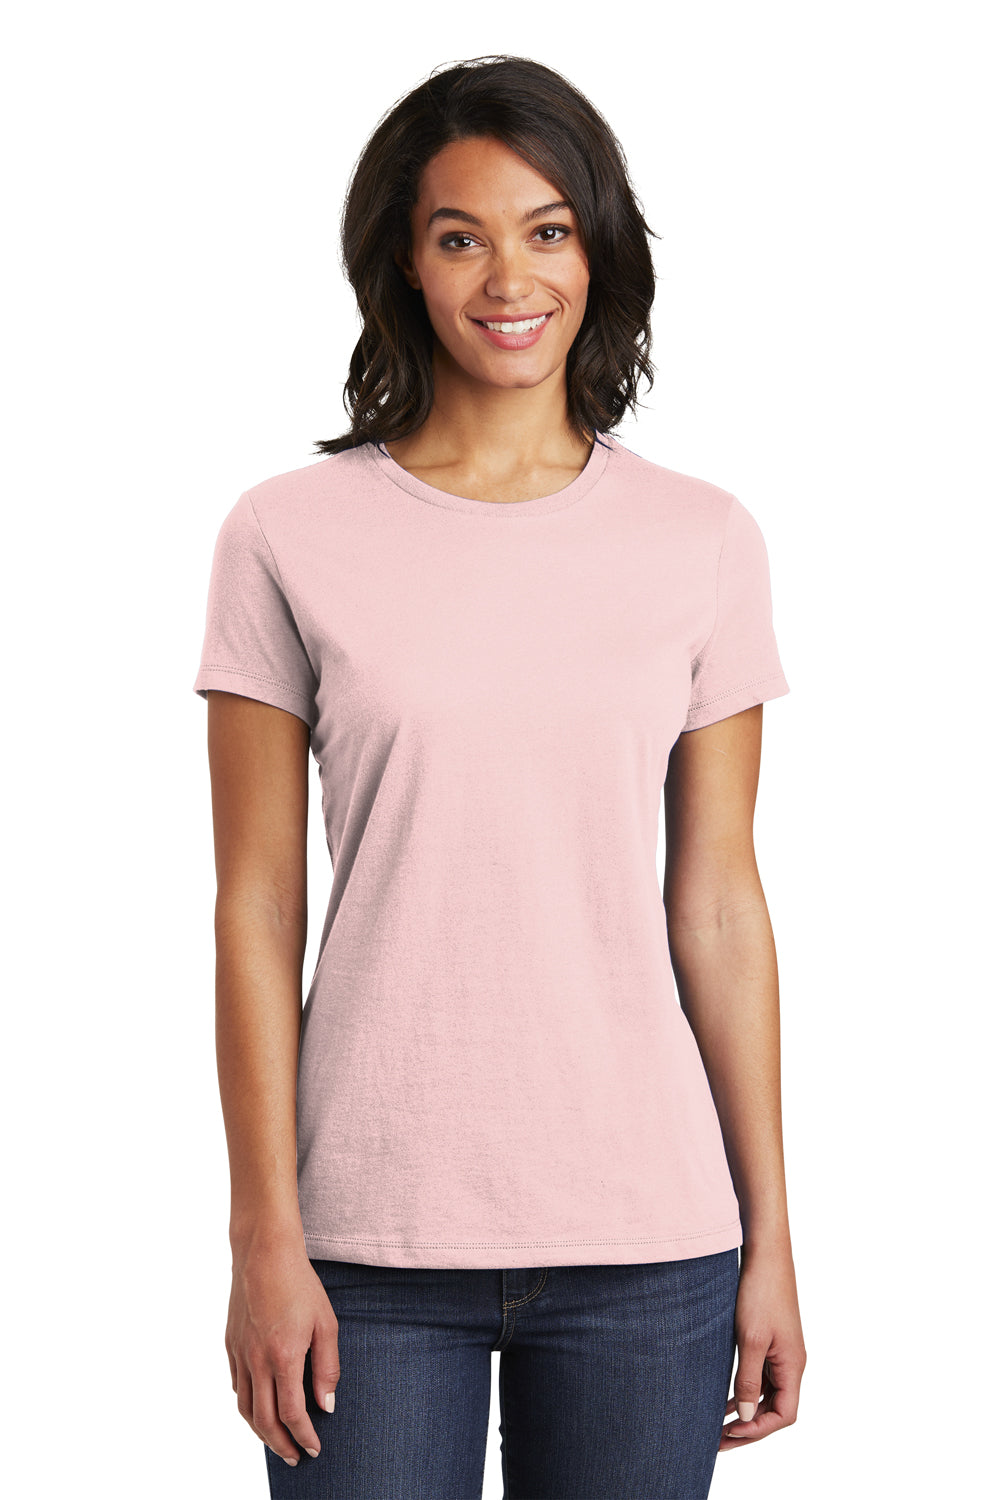 District DT6002 Womens Very Important Short Sleeve Crewneck T-Shirt Dusty Pink Front